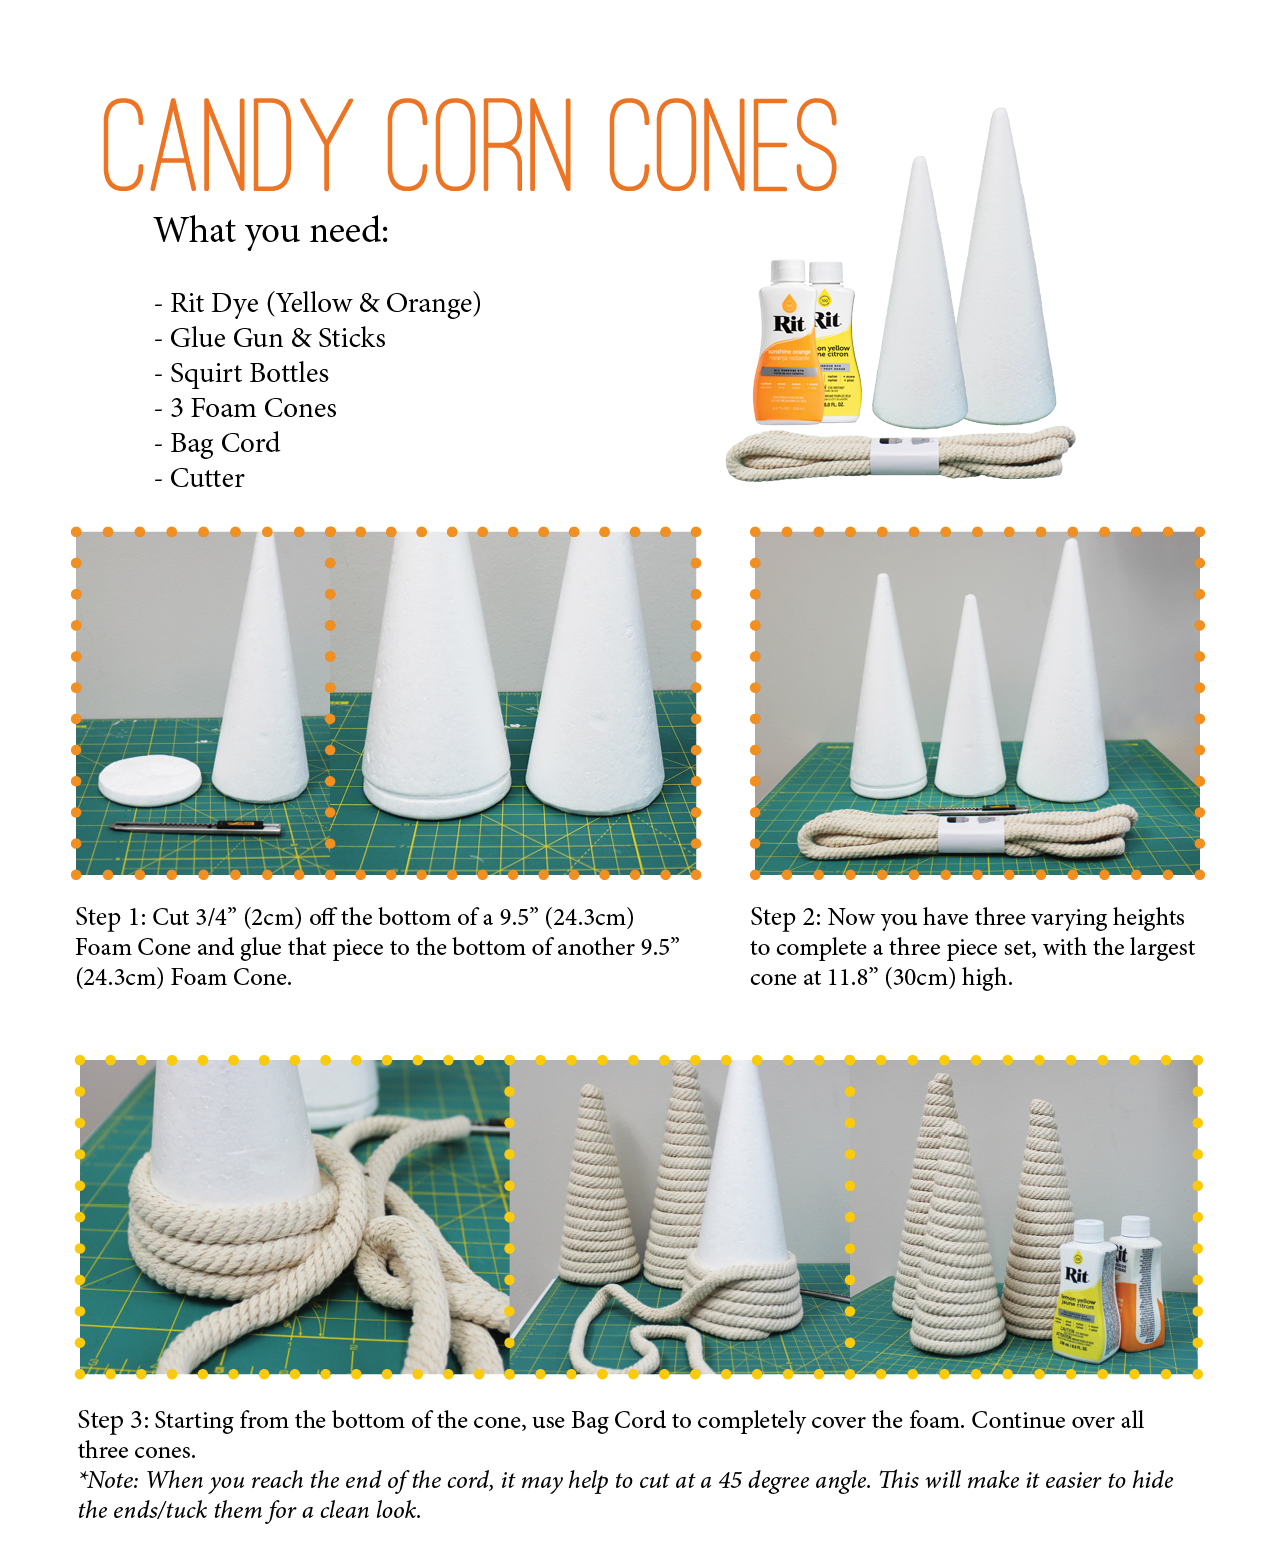 First set of steps to creating your own Candy Corn Cones